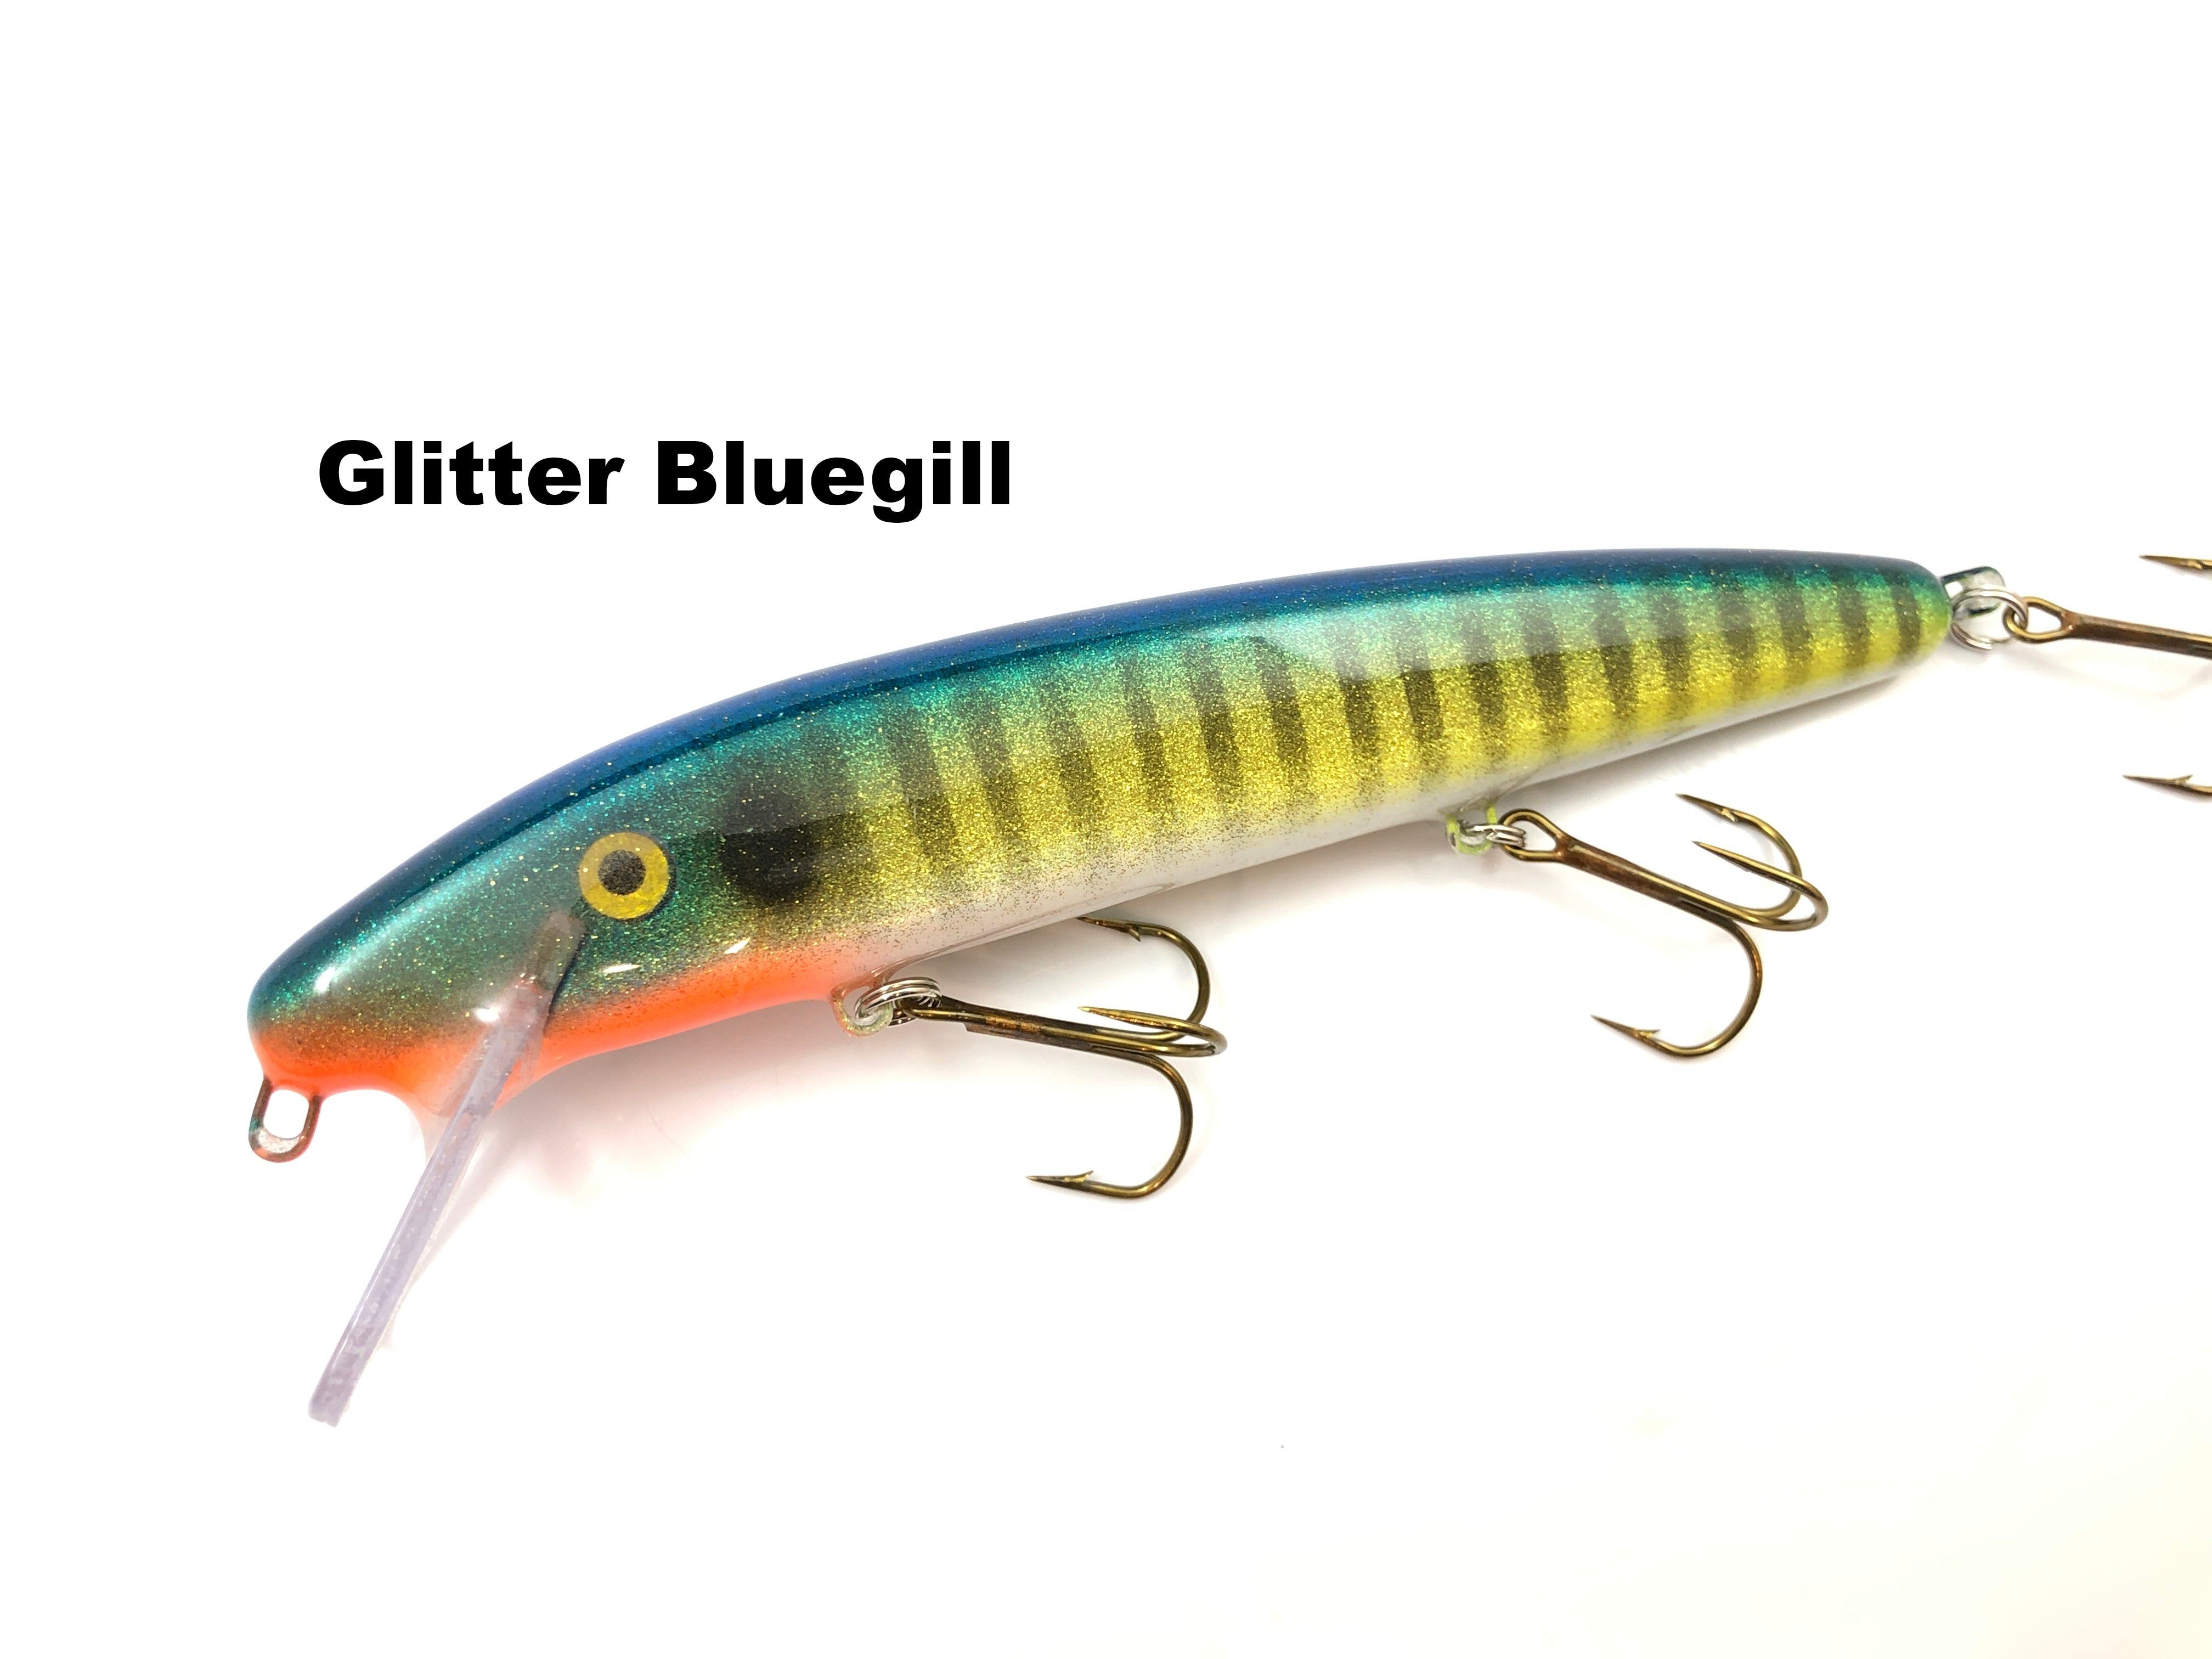 Neuse River Bait & Tackle - Ugly Duckling 27MR in stock! This thing is a  trout catching machine! Only at Neuse River Bait and Tackle! .  #custommirrolure #mirrolure #uglyduckling #trout #speckledtrout  #troutfishing #